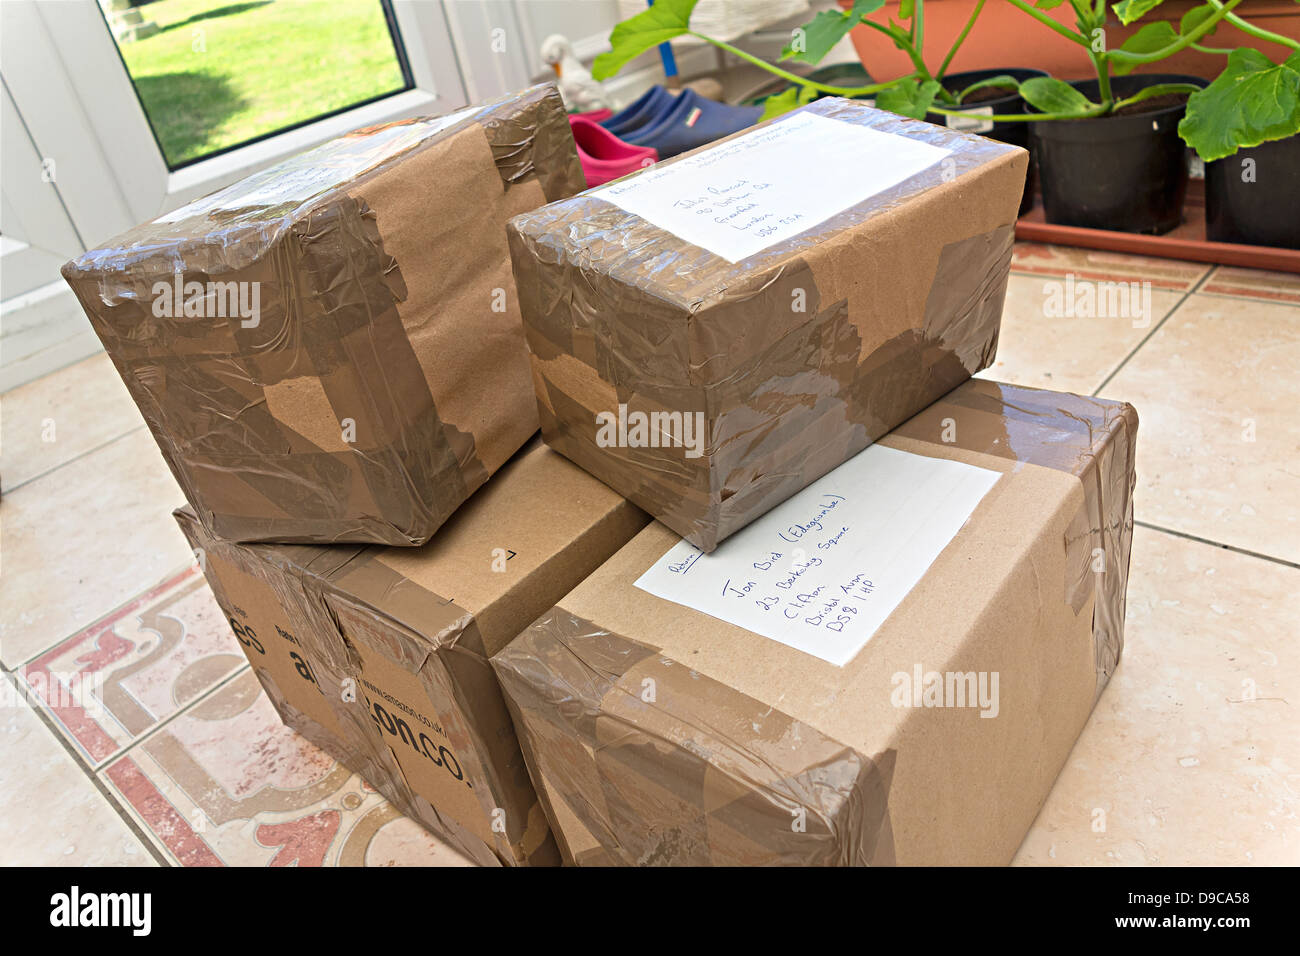 Parcels, boxes stacked up on the floor ready for delivery. Stock Photo